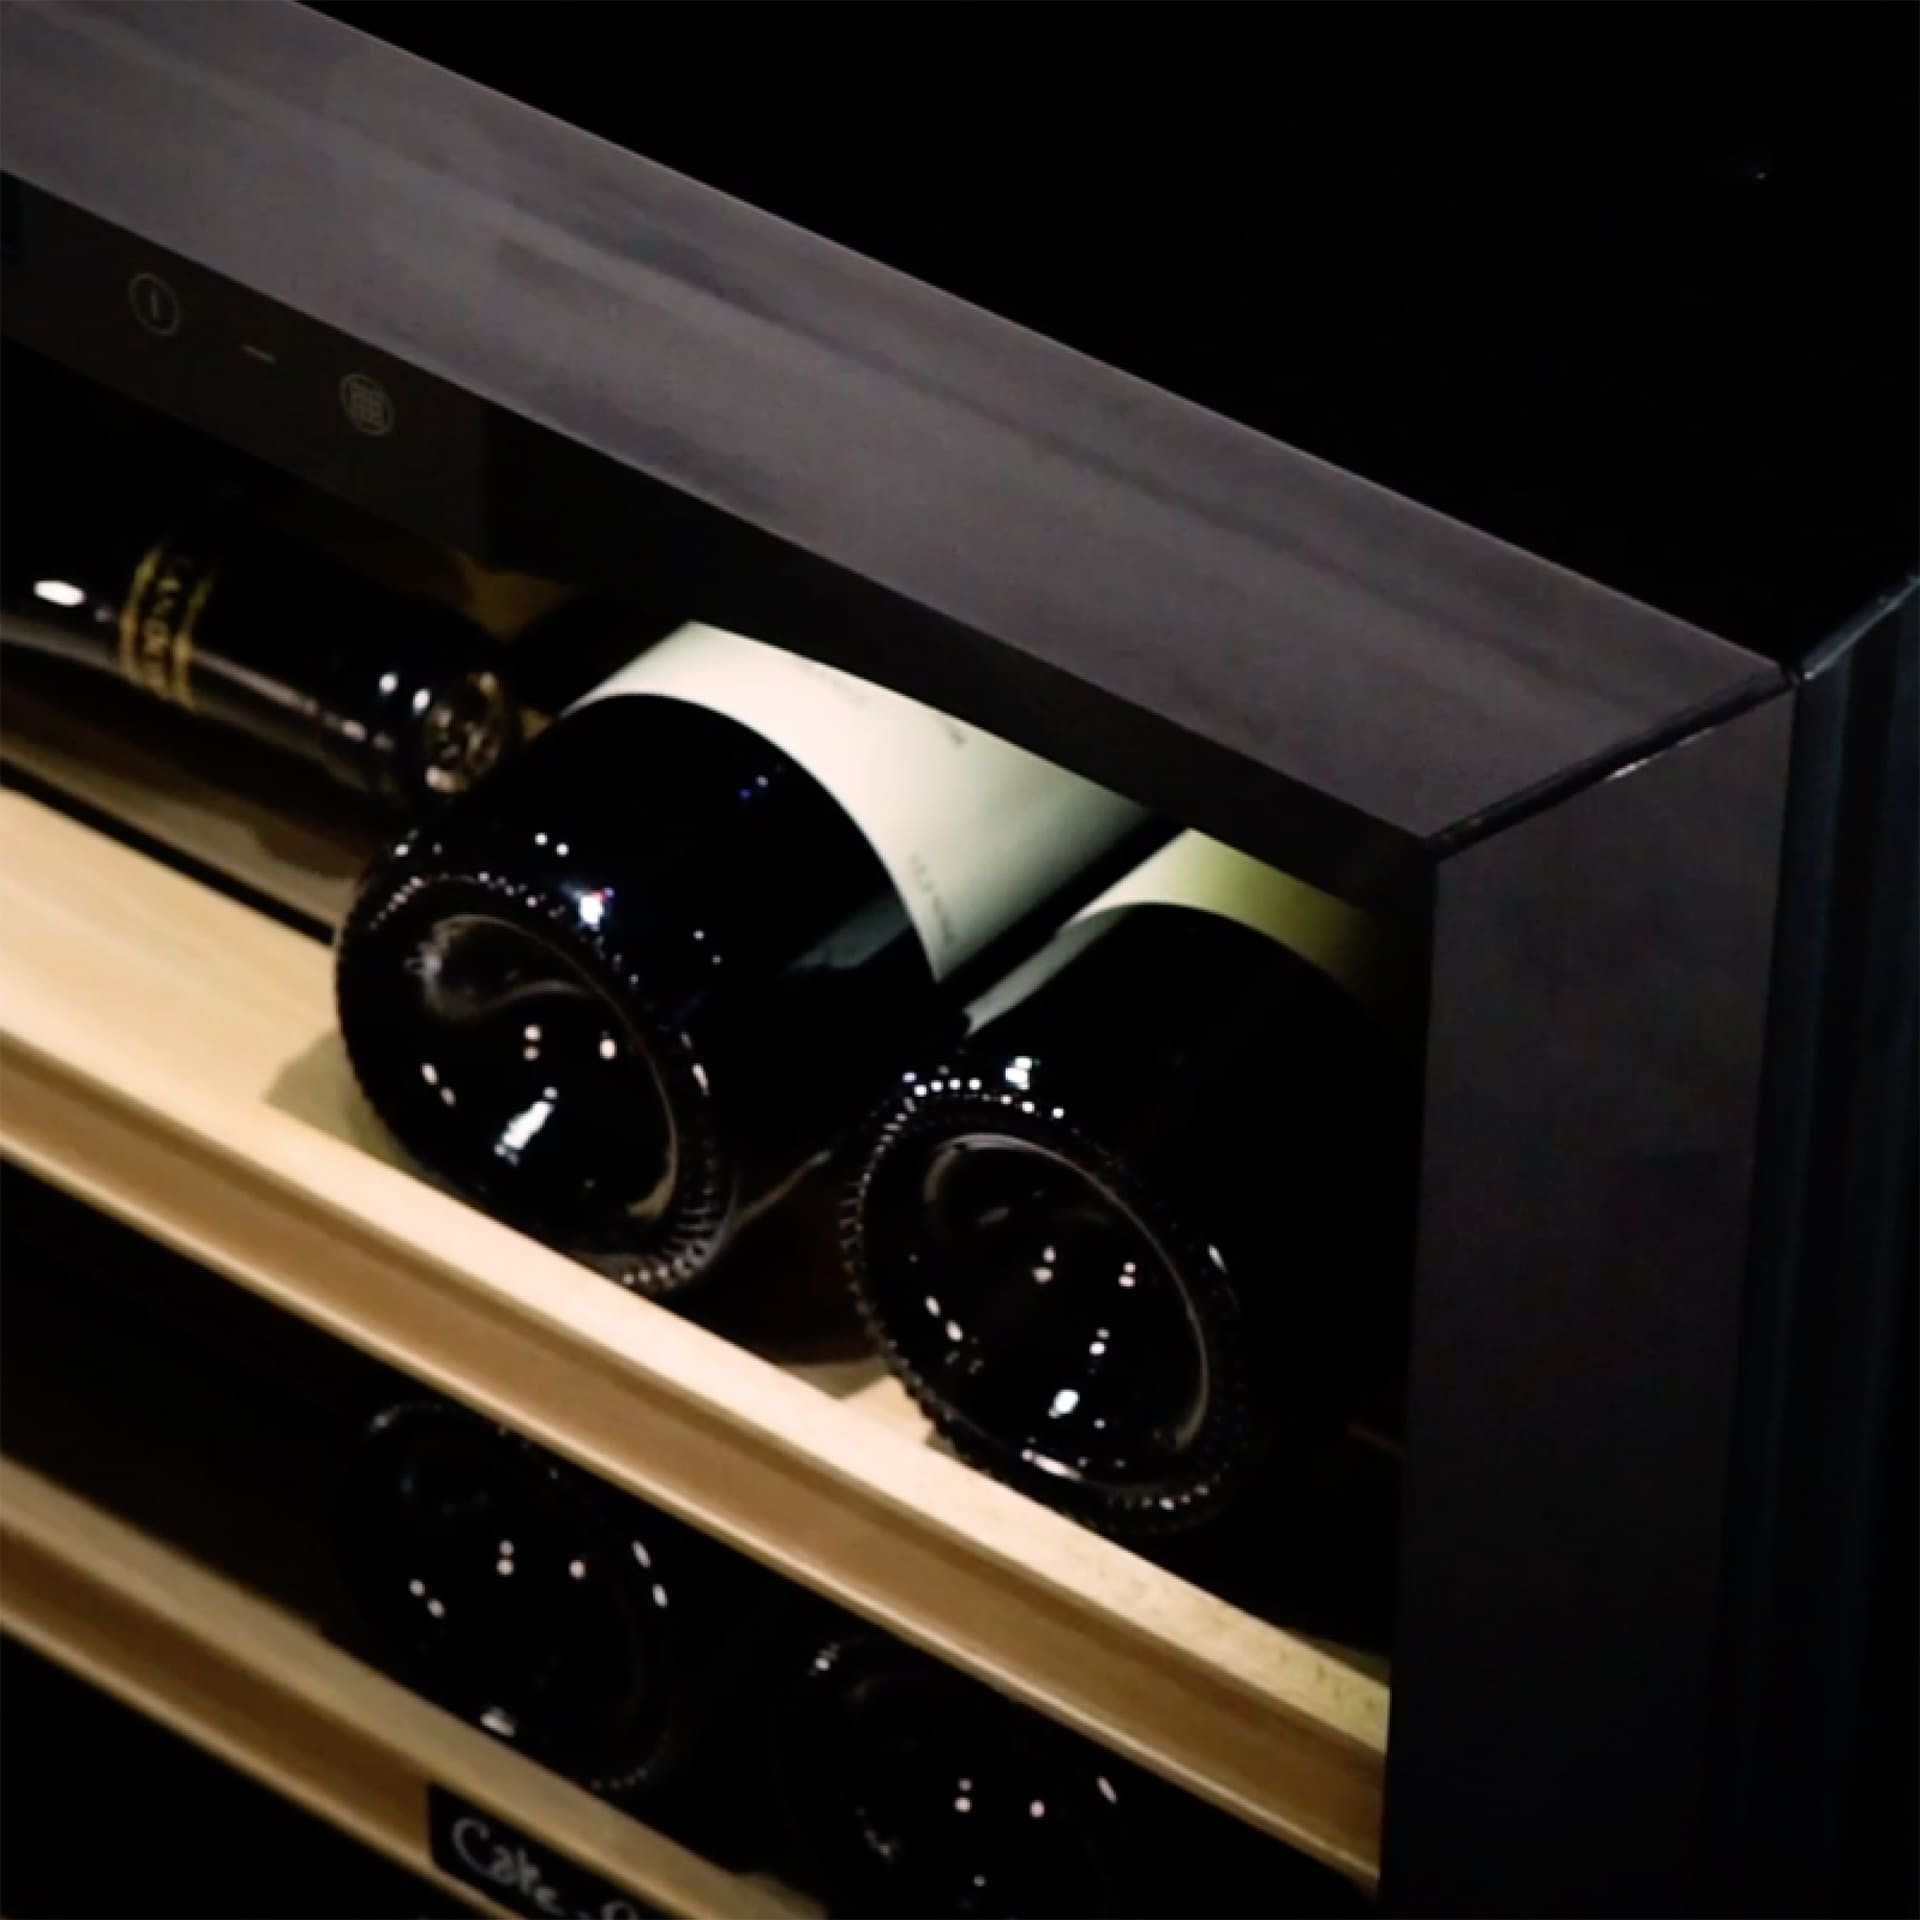 Wine coolers with white lighting to clearly see your bottles - La Première EuroCave